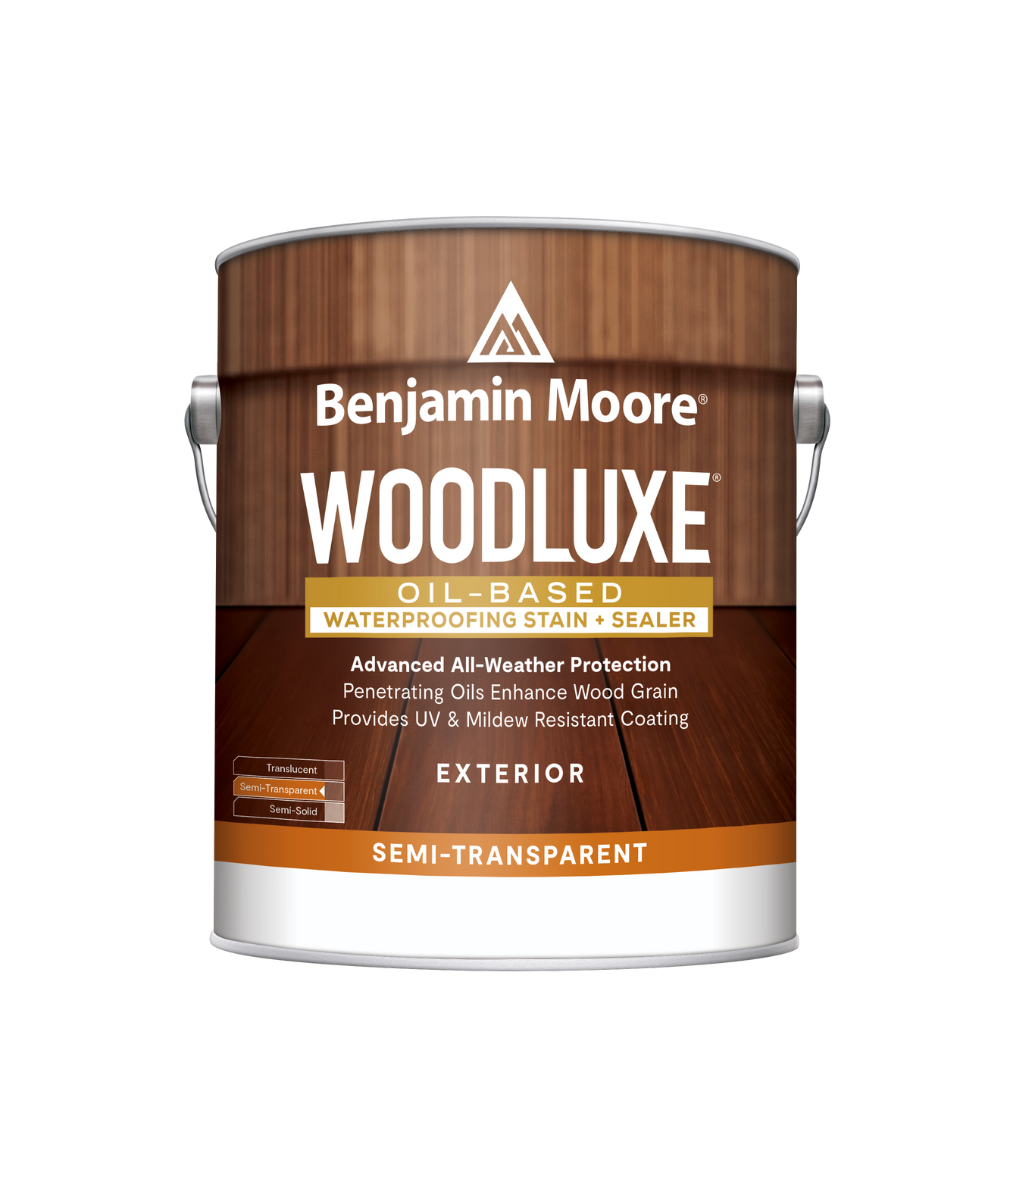 Benjamin Moore Woodluxe® Oil-Based Semi-Transparent Exterior Stain available at JC Licht.